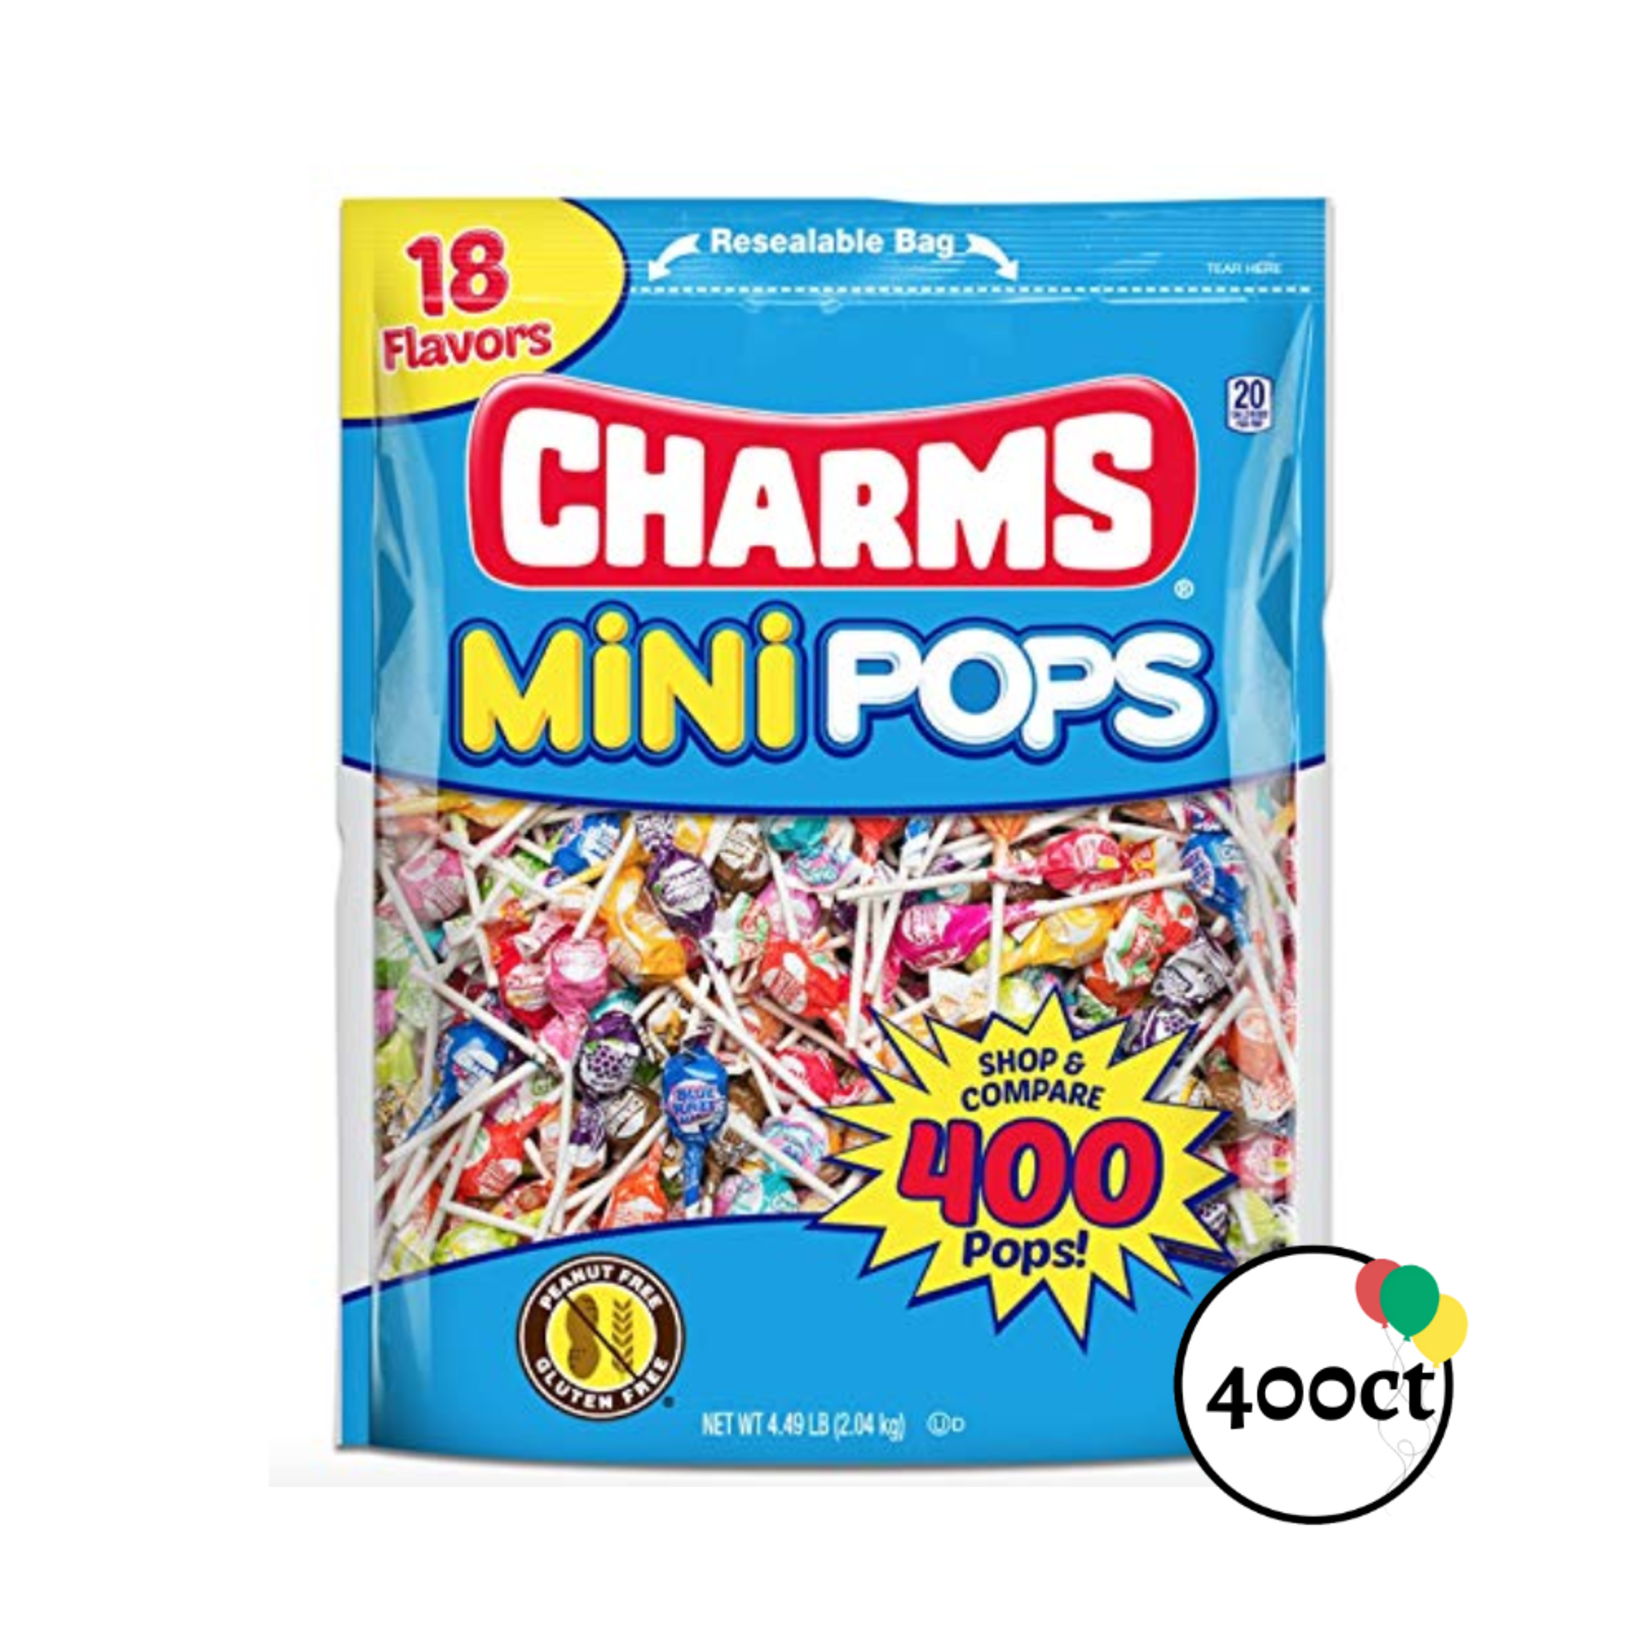 Charms Charms Mini Pops 400ct Stand Up Pouch